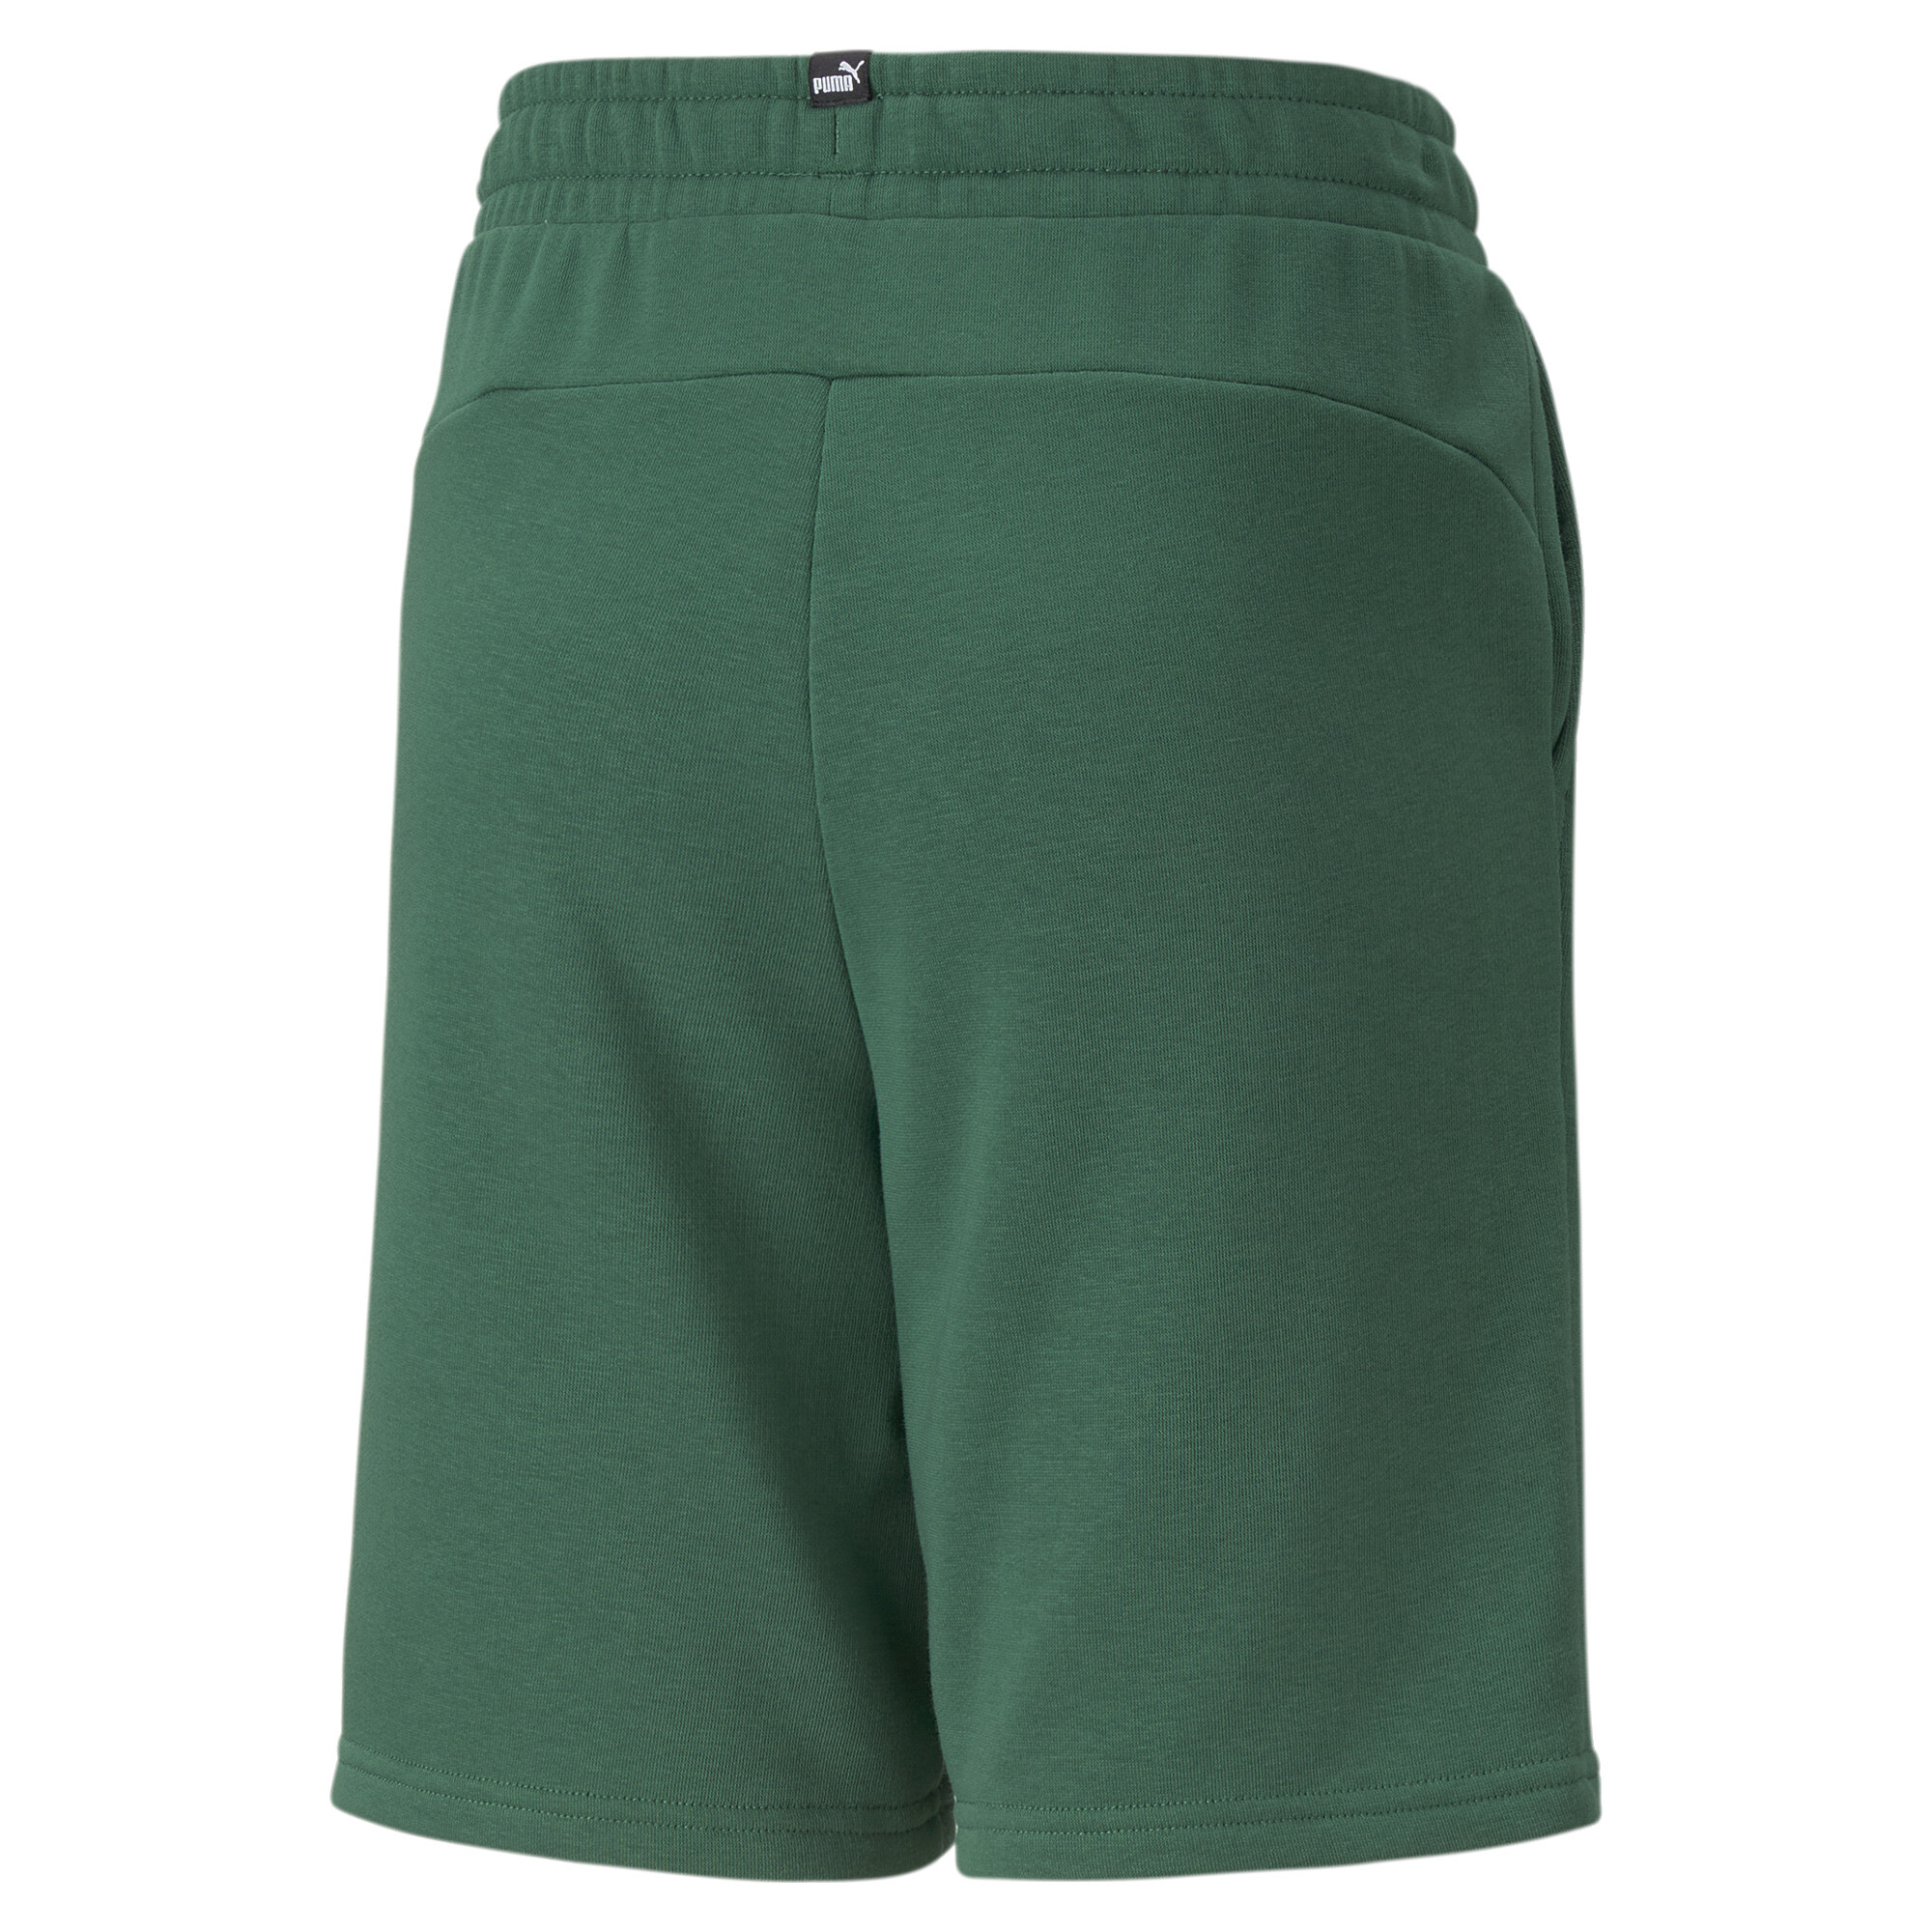 Men's Puma Essentials+ Two-Tone Youth Shorts, Green, Size 4-5Y, Clothing